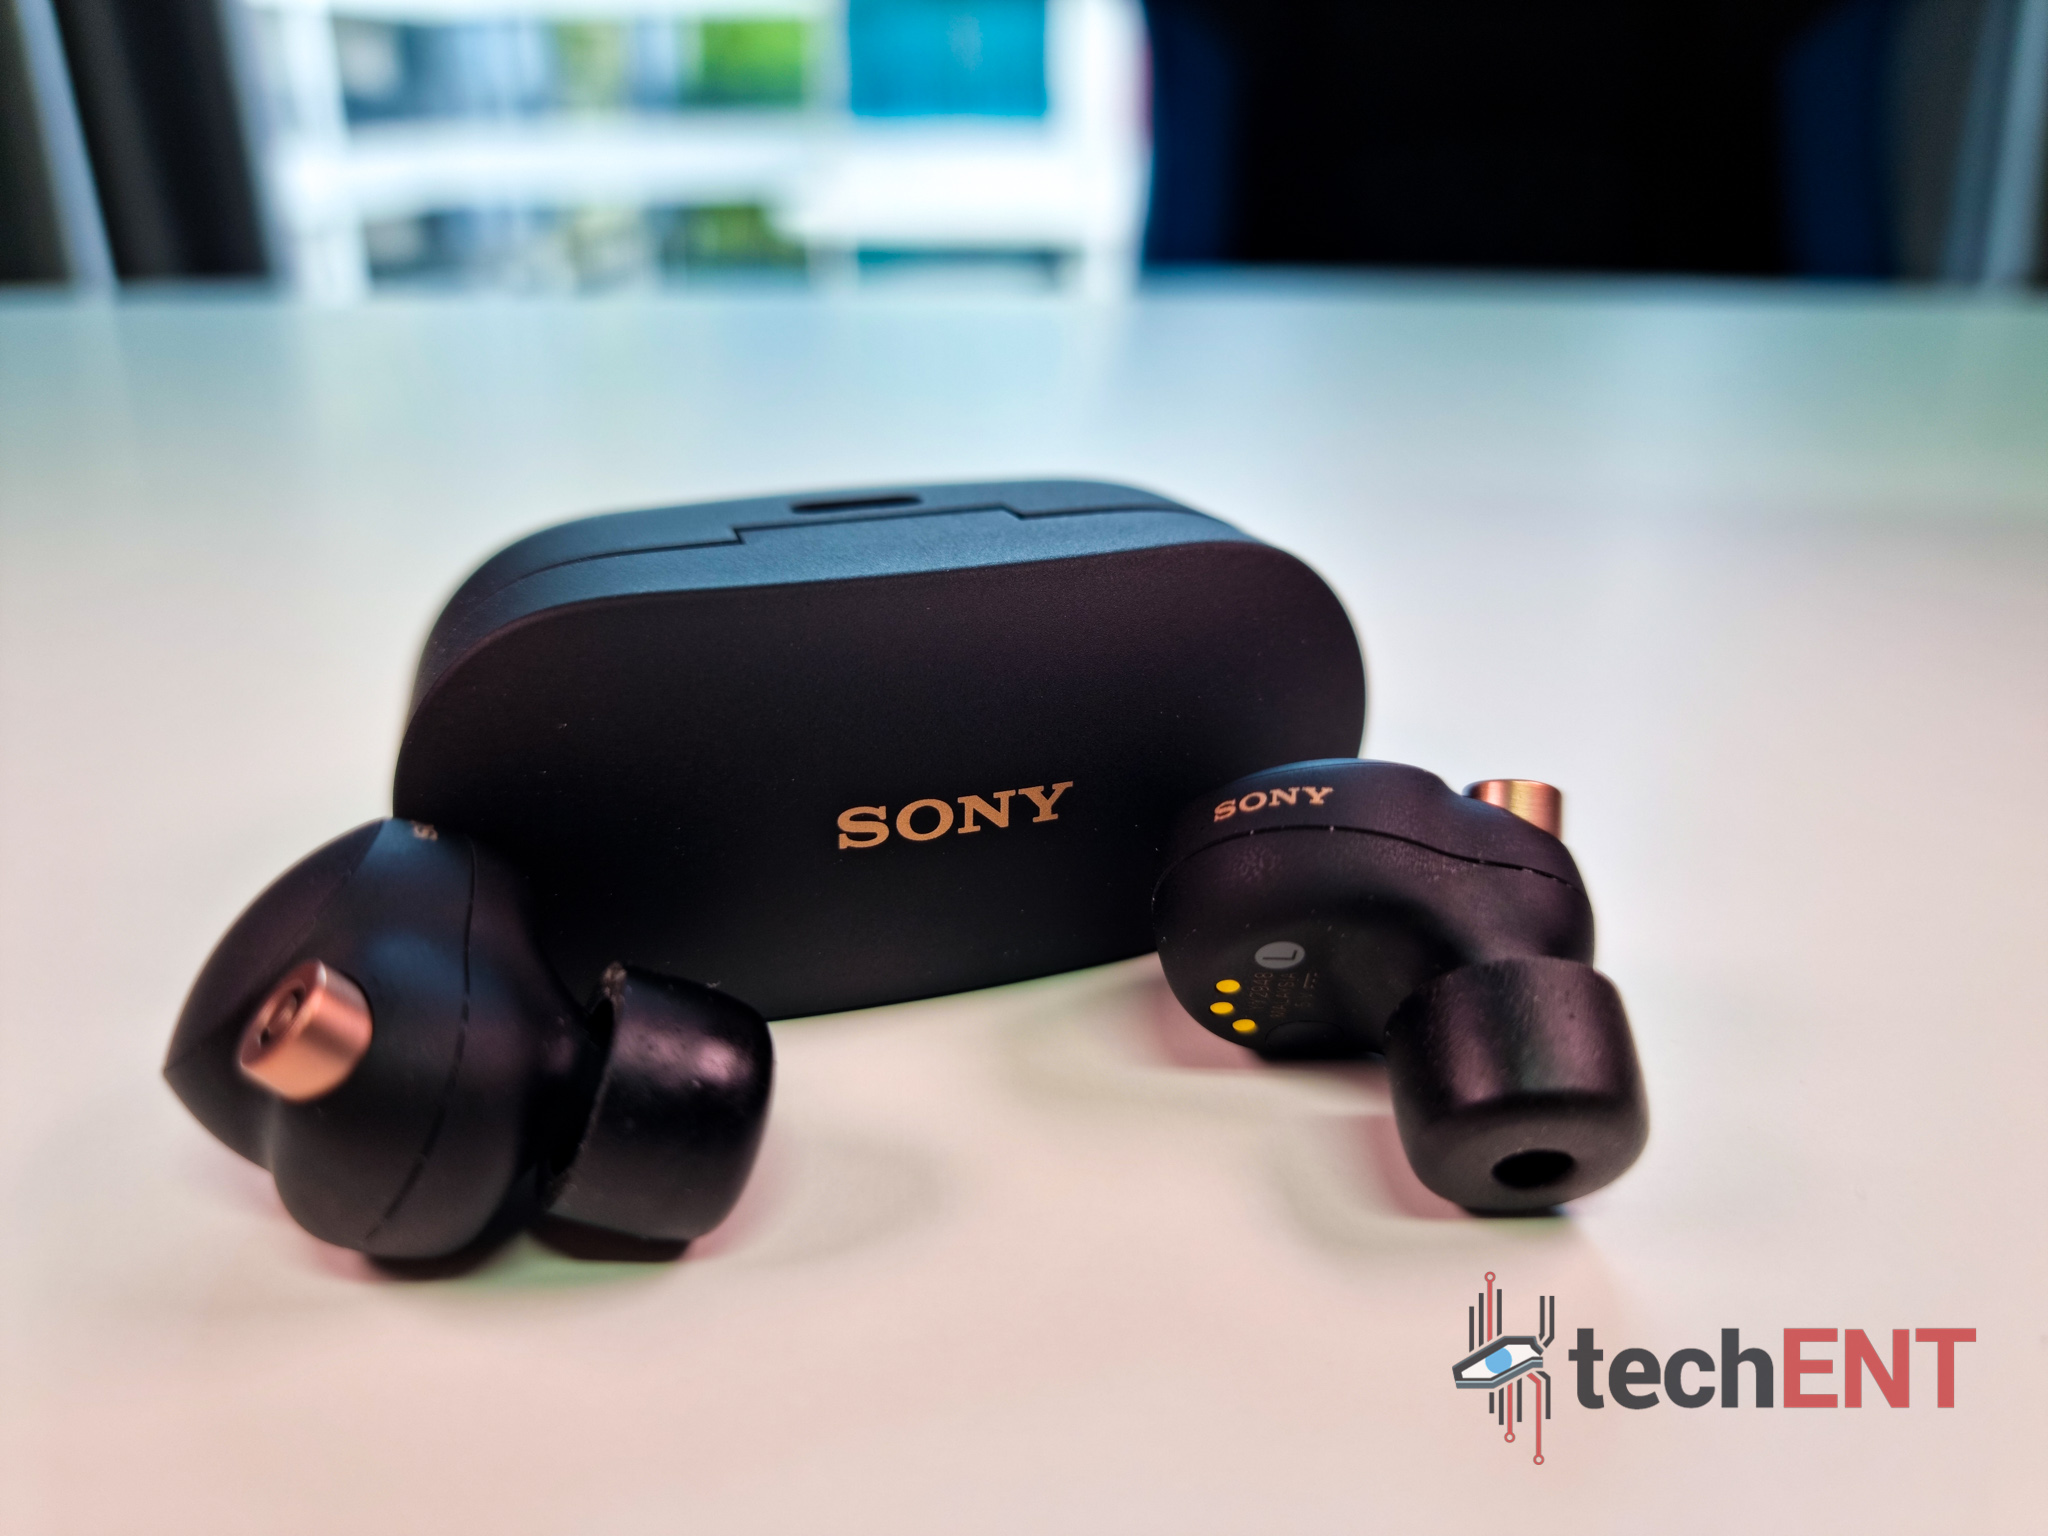 Sony WF-1000XM4 In-Depth Review – The Best got Better | techENT